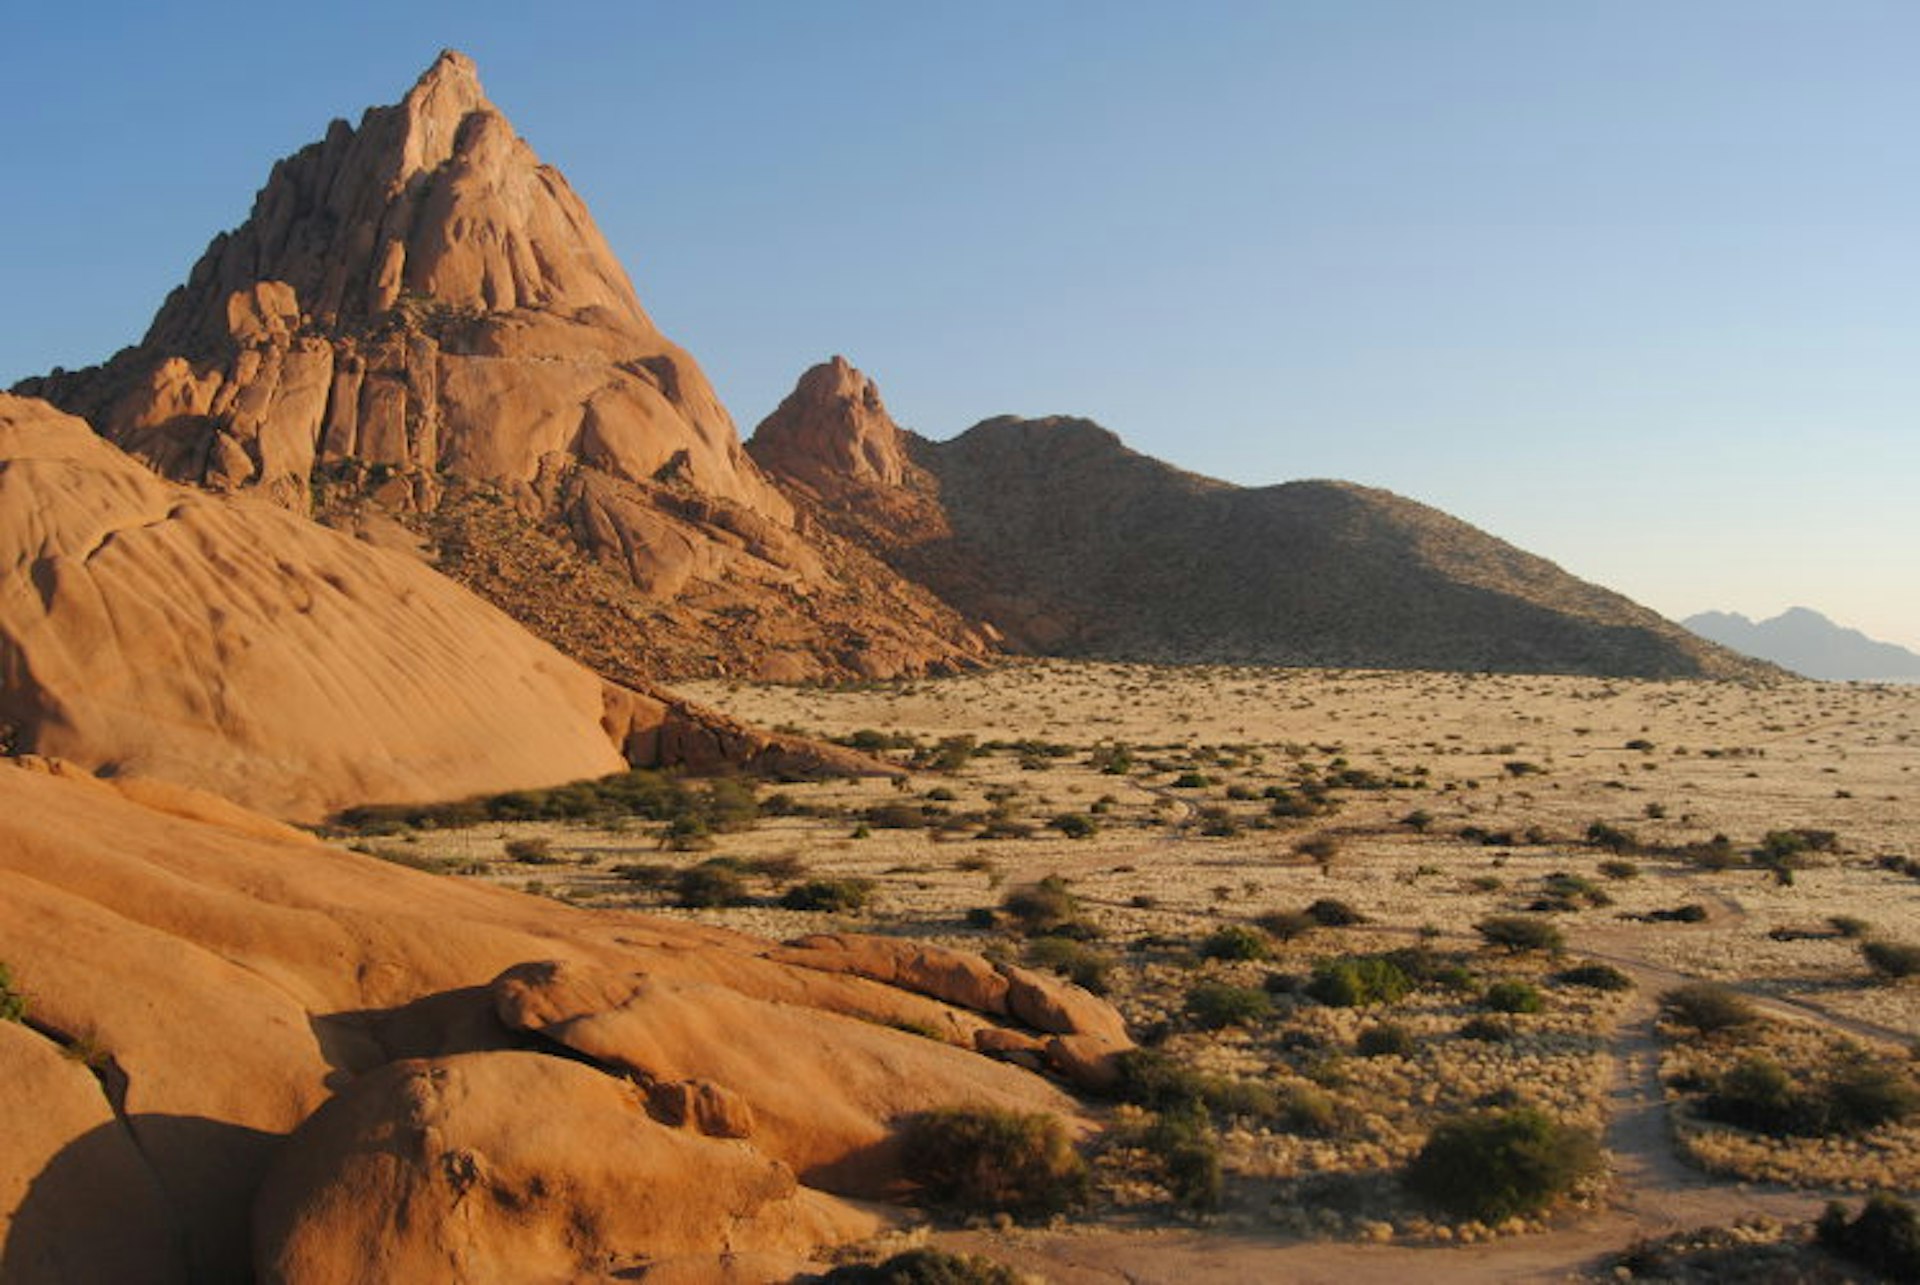 Spitzkoppe, the 'Matterhorn of Africa', Damaraland, Namibia. Image by Rachel Hobday / CC BY 2.0